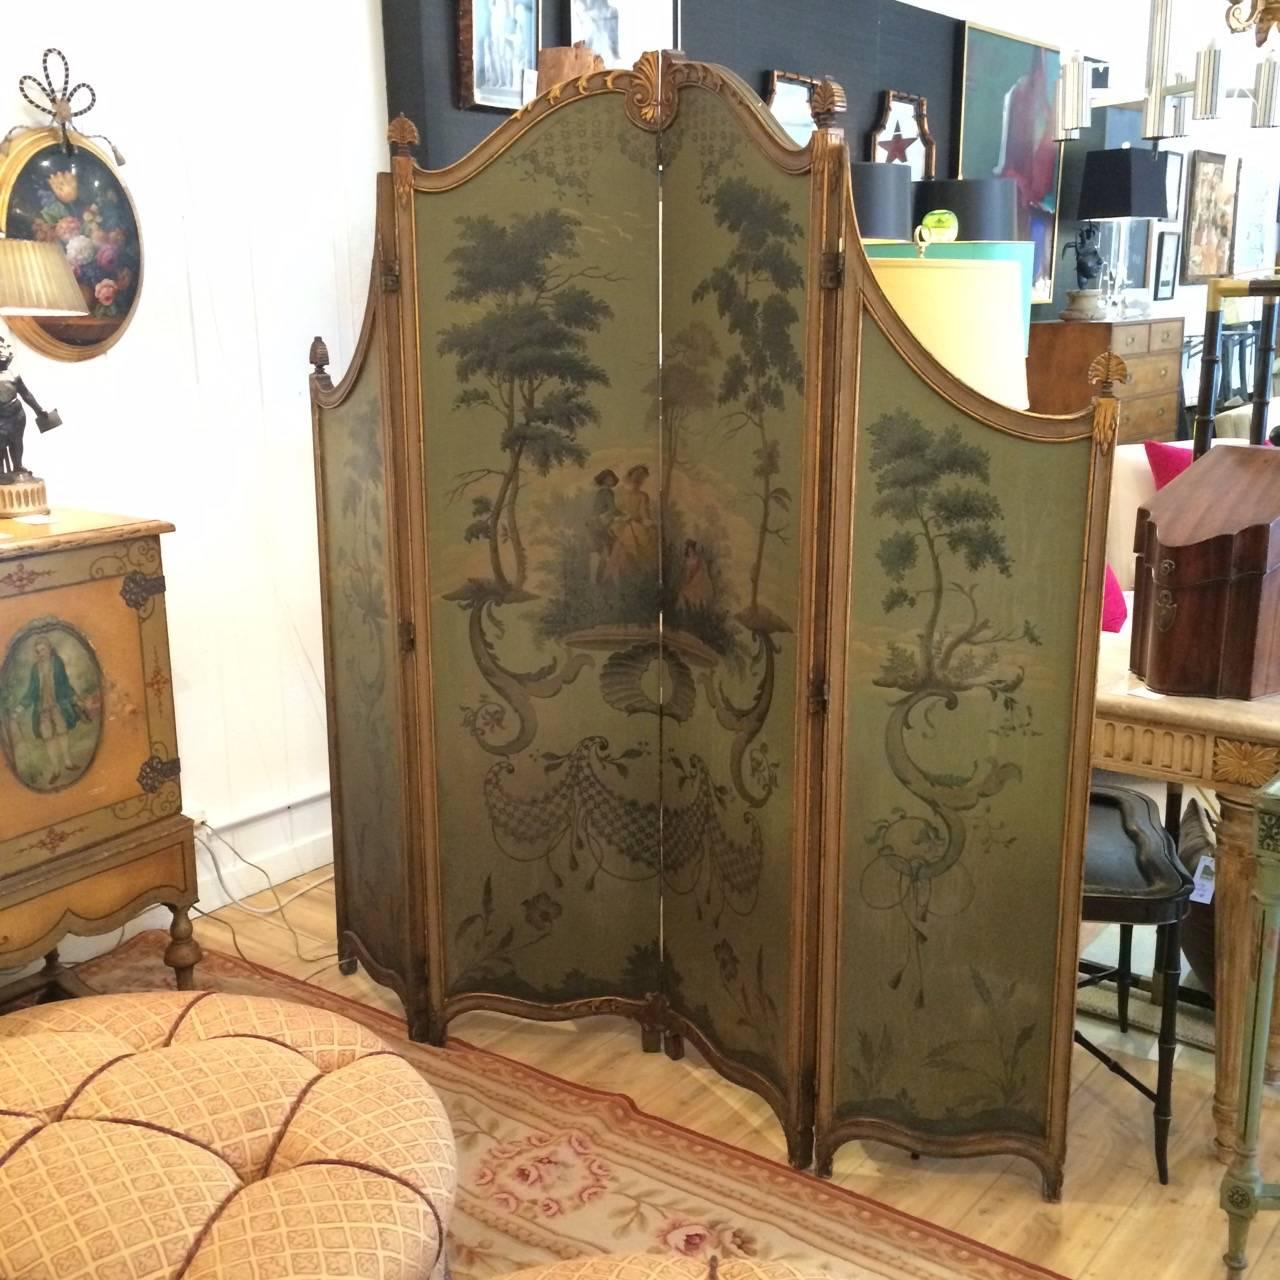 A rare gem of a French hand-painted and giltwood screen, having four accordion panels in a muted green with pastoral scenes on the front, and wonderful chintz upholstery with double welting on the back. In addition to use as a screen or room